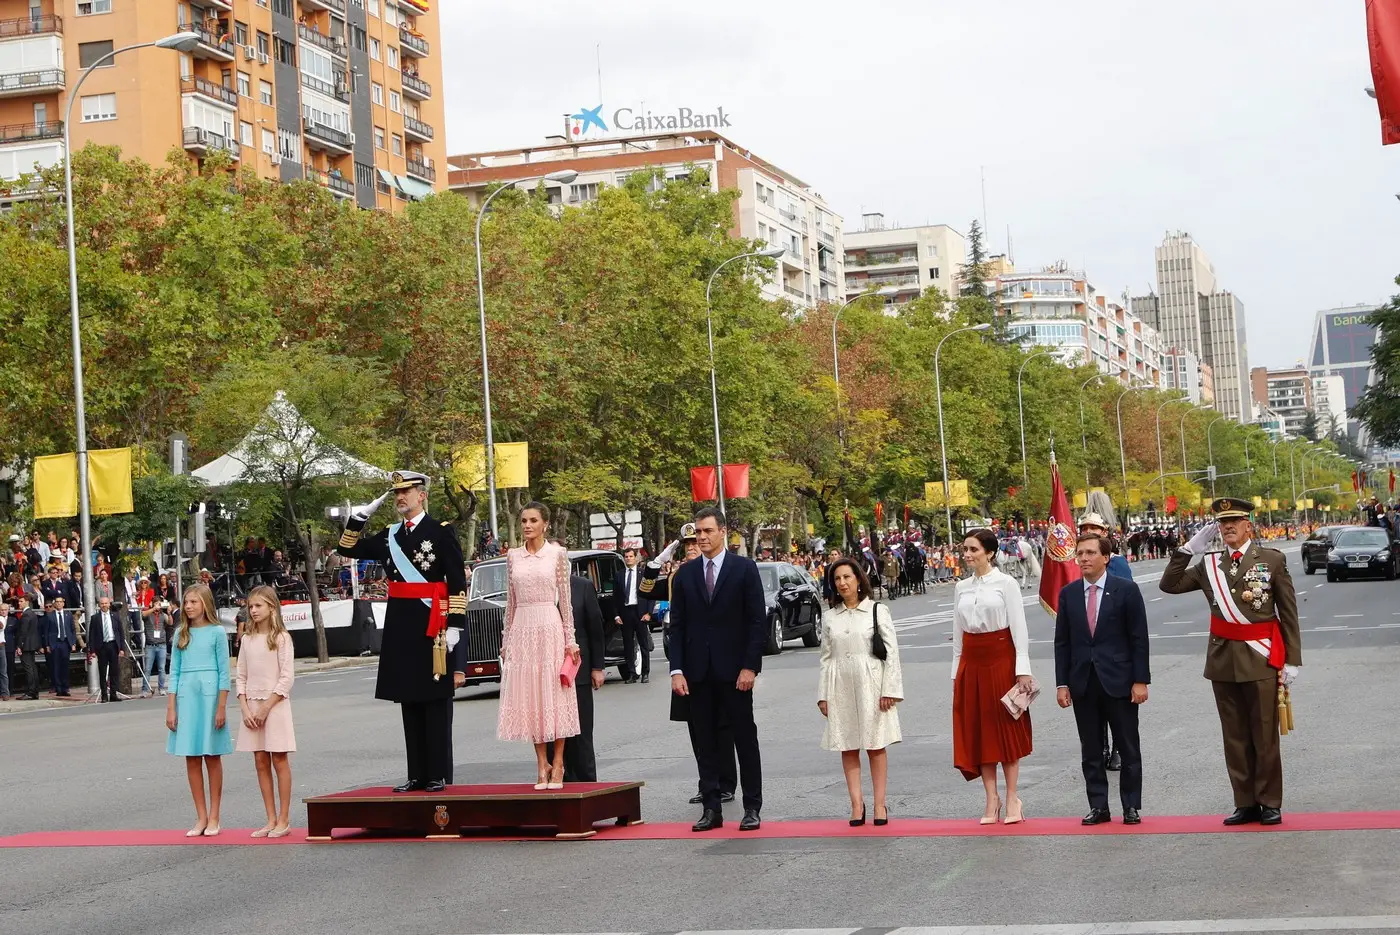 King Felipe and Queen Letizia at National Day Celebrations